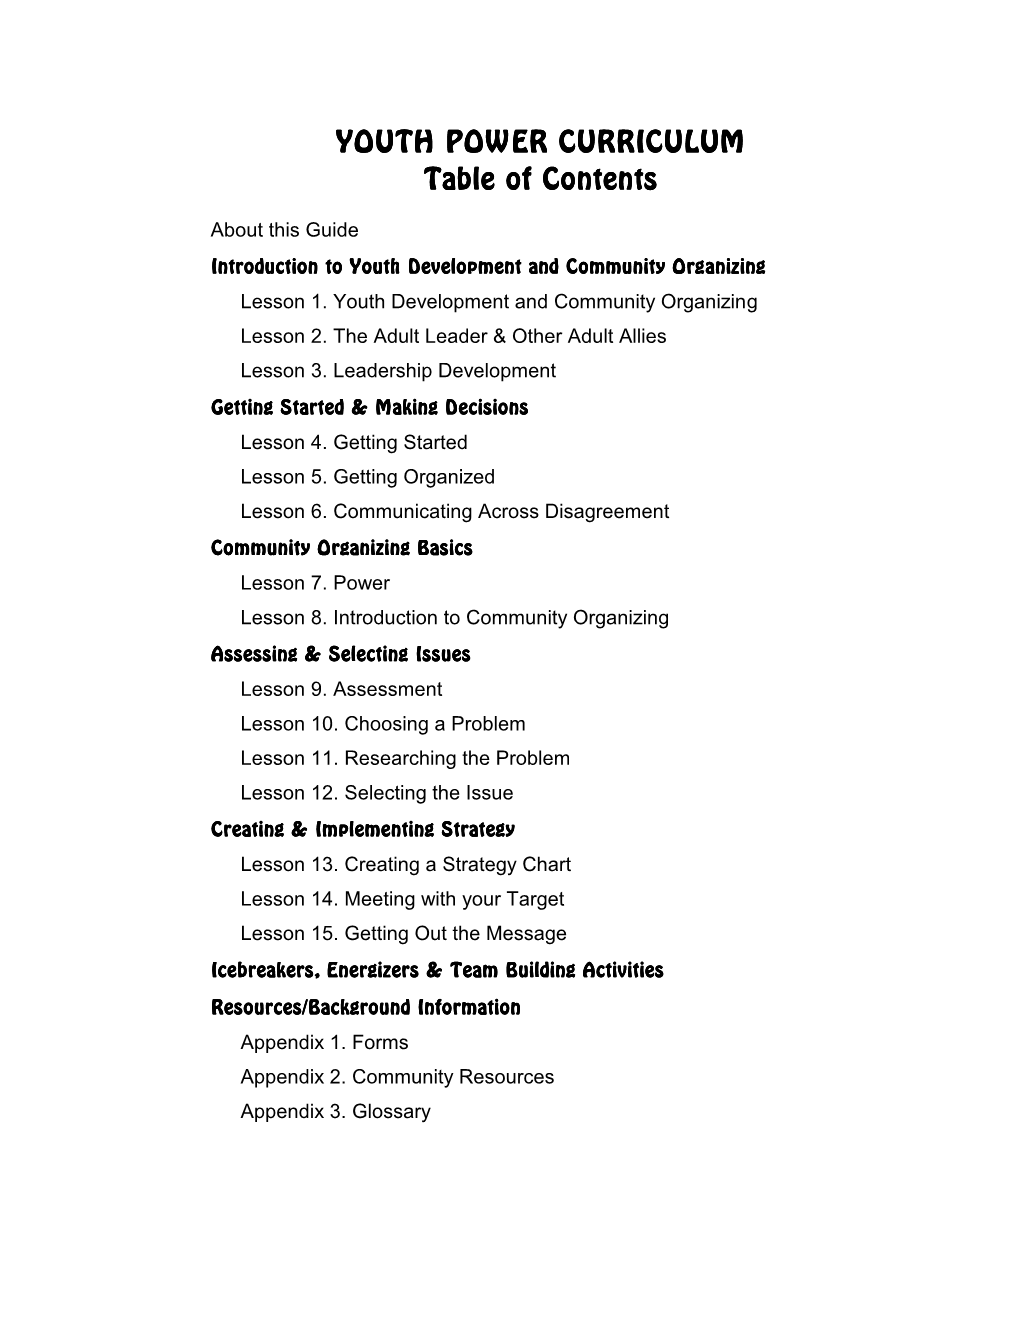 YOUTH POWER CURRICULUM Table of Contents